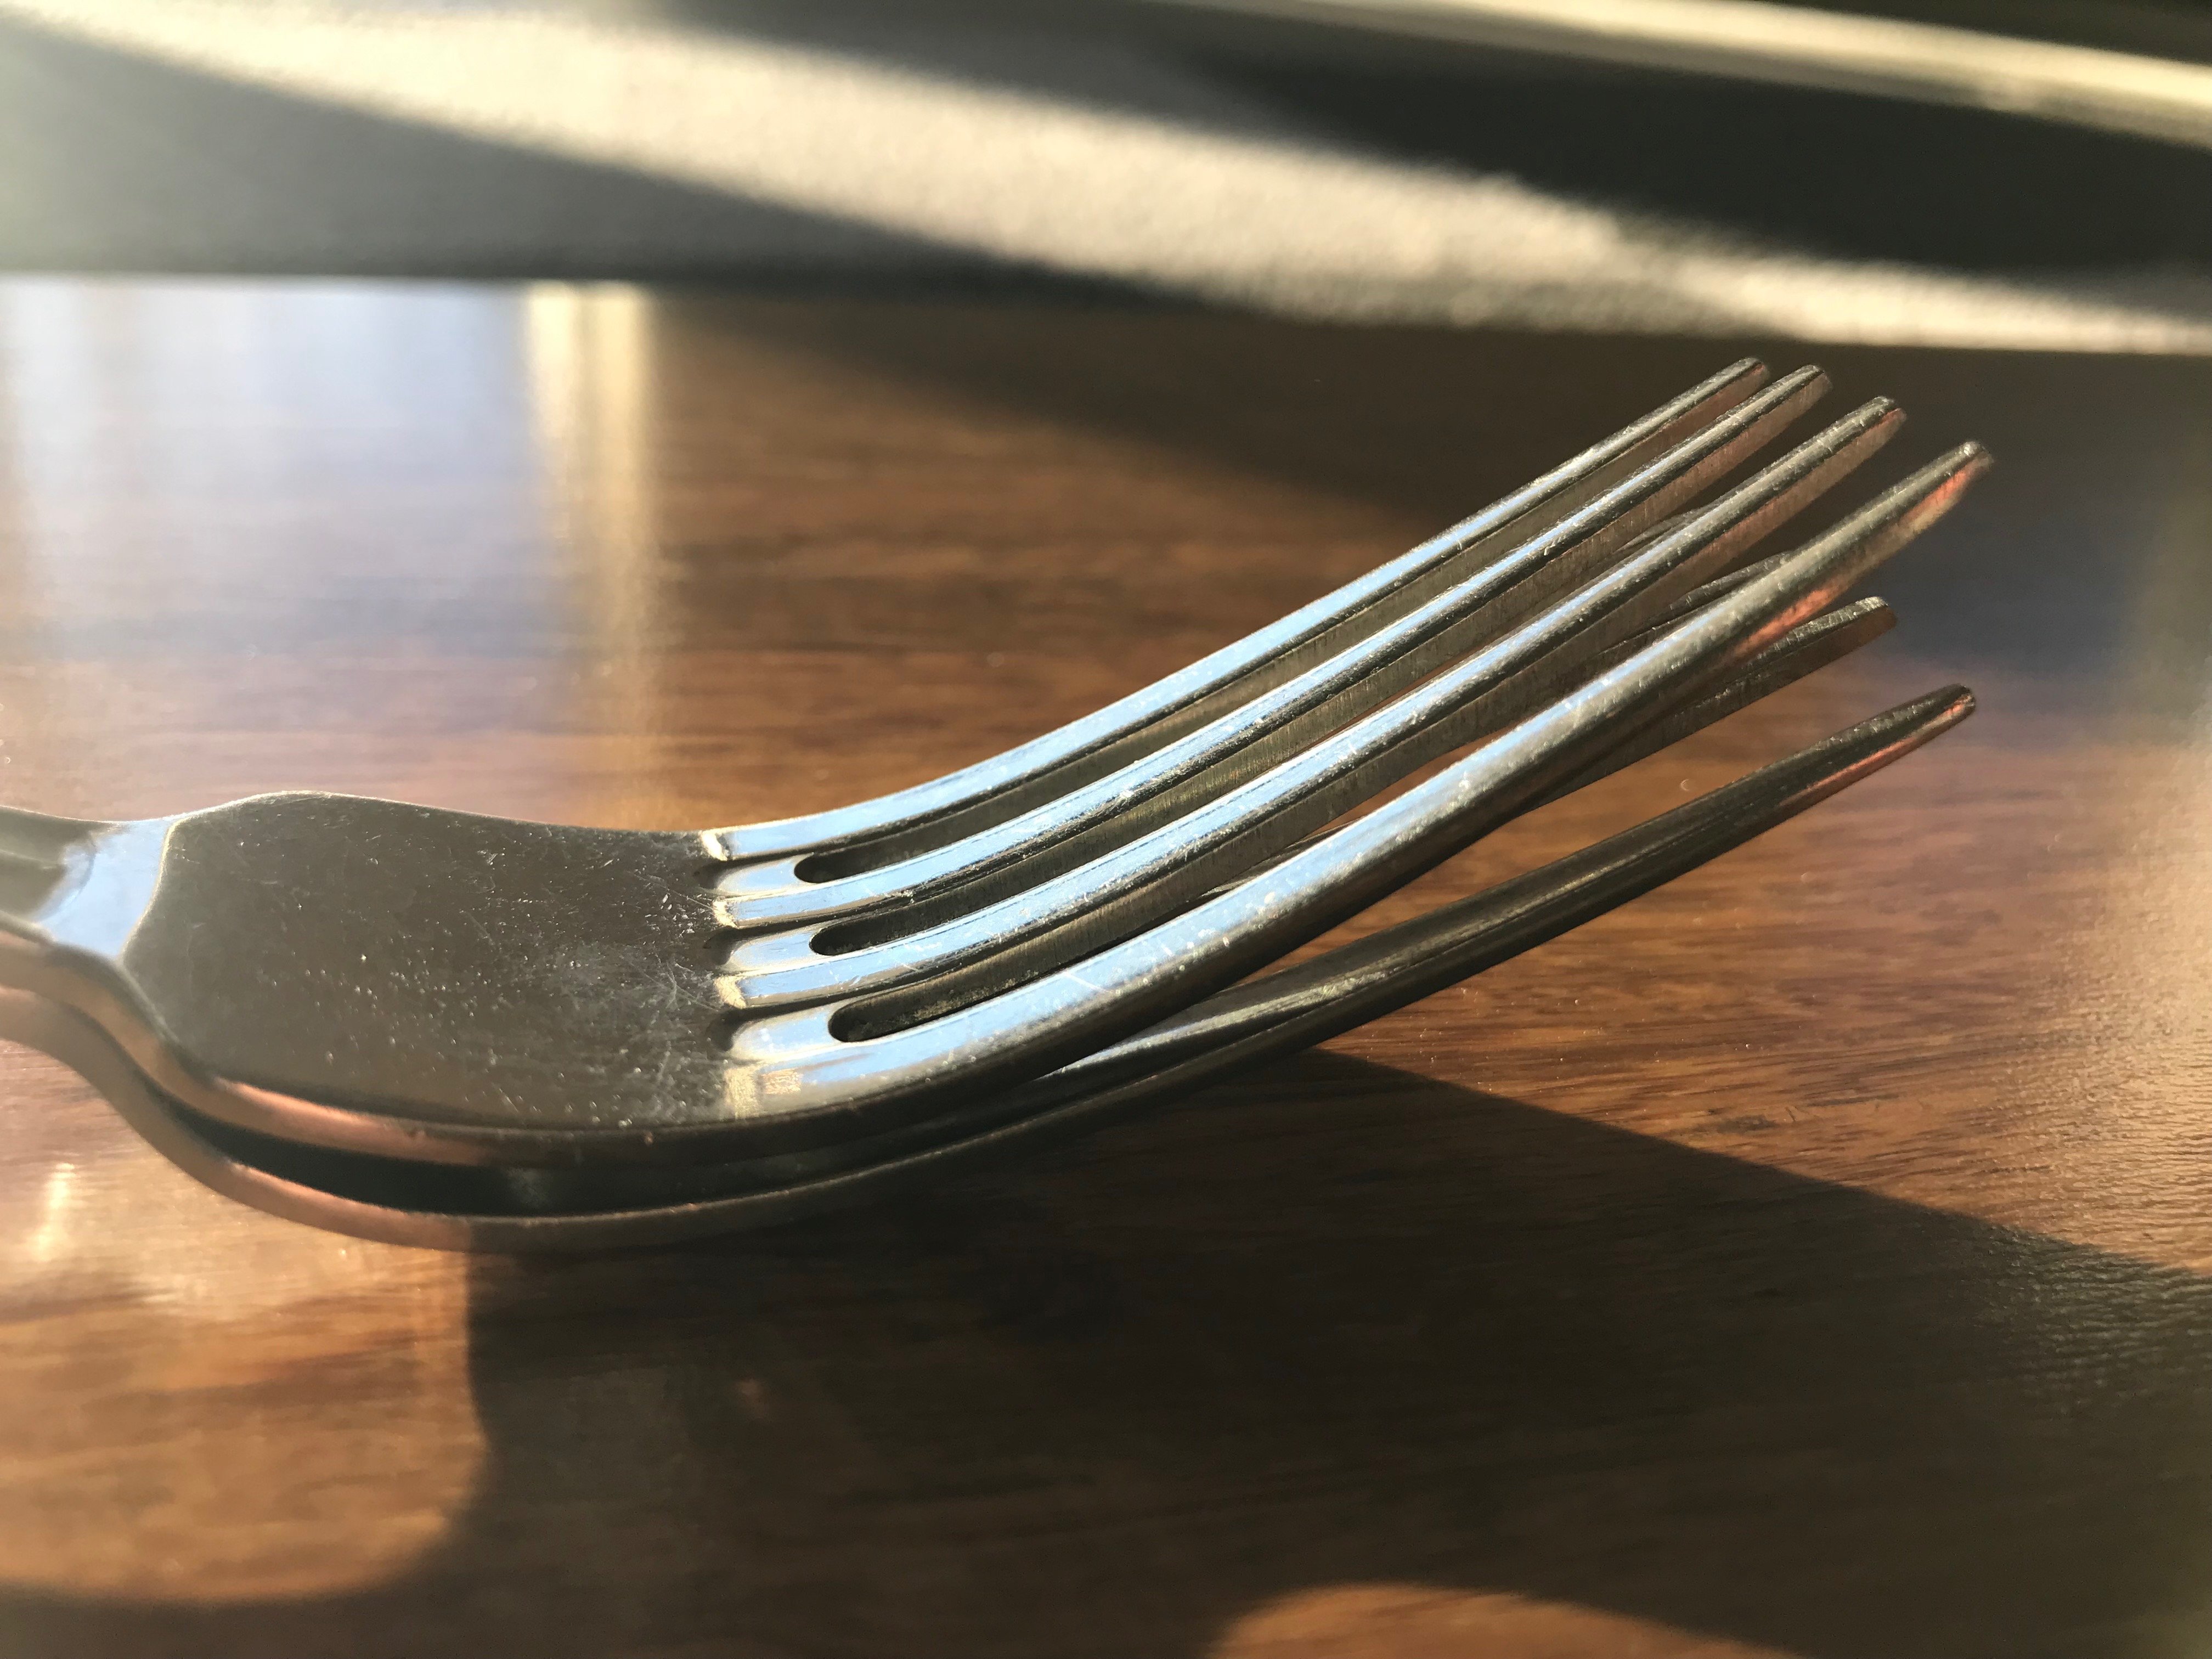 not all flatware is equal